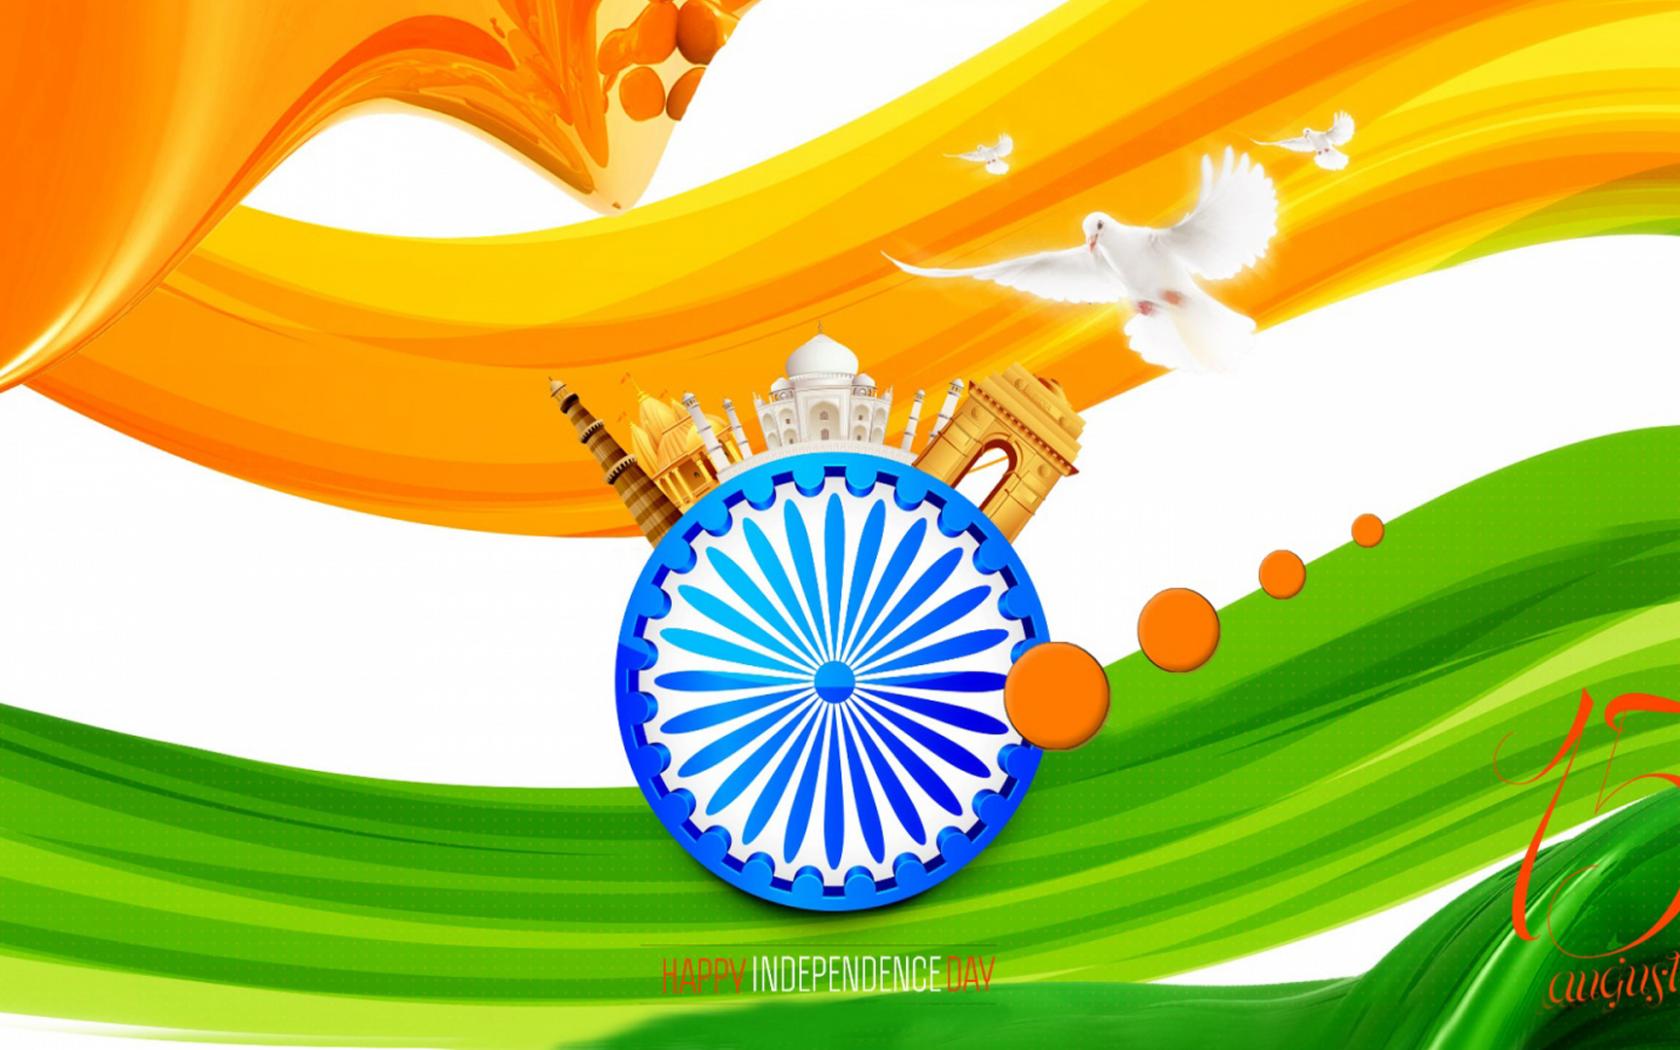 India Independence Day Wallpaper in HD with 1920x1080 Wallpaper. Wallpaper Download. High Resolution Wallpaper